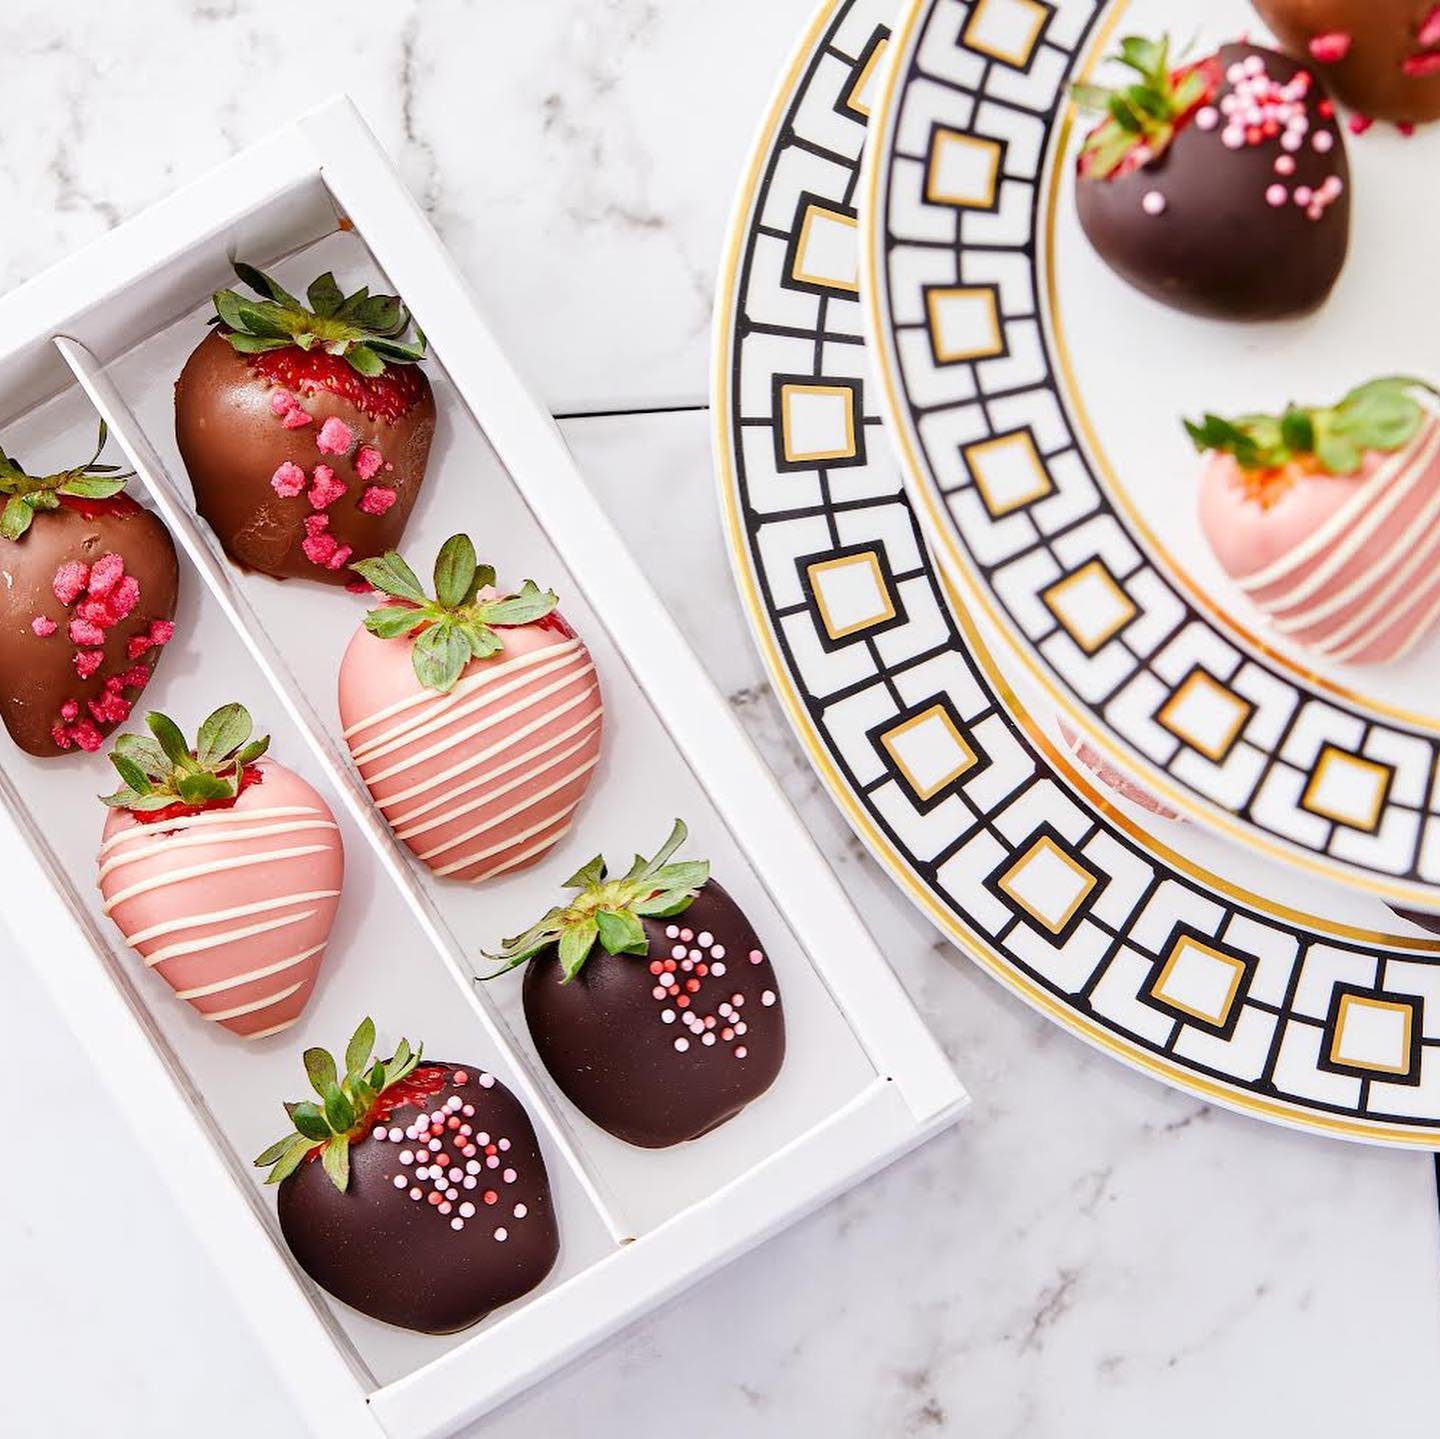 Chocoate dipped stawberries = the perfect way to secure those Mothers&rsquo;s Day bonus points. 🍓 

Enjoy our speciality Mother&rsquo;s Day chocolate dipped strawberry box available at the David Jones Celebrations Bar.

Until May 12th. 
.
.
.
.
#cre